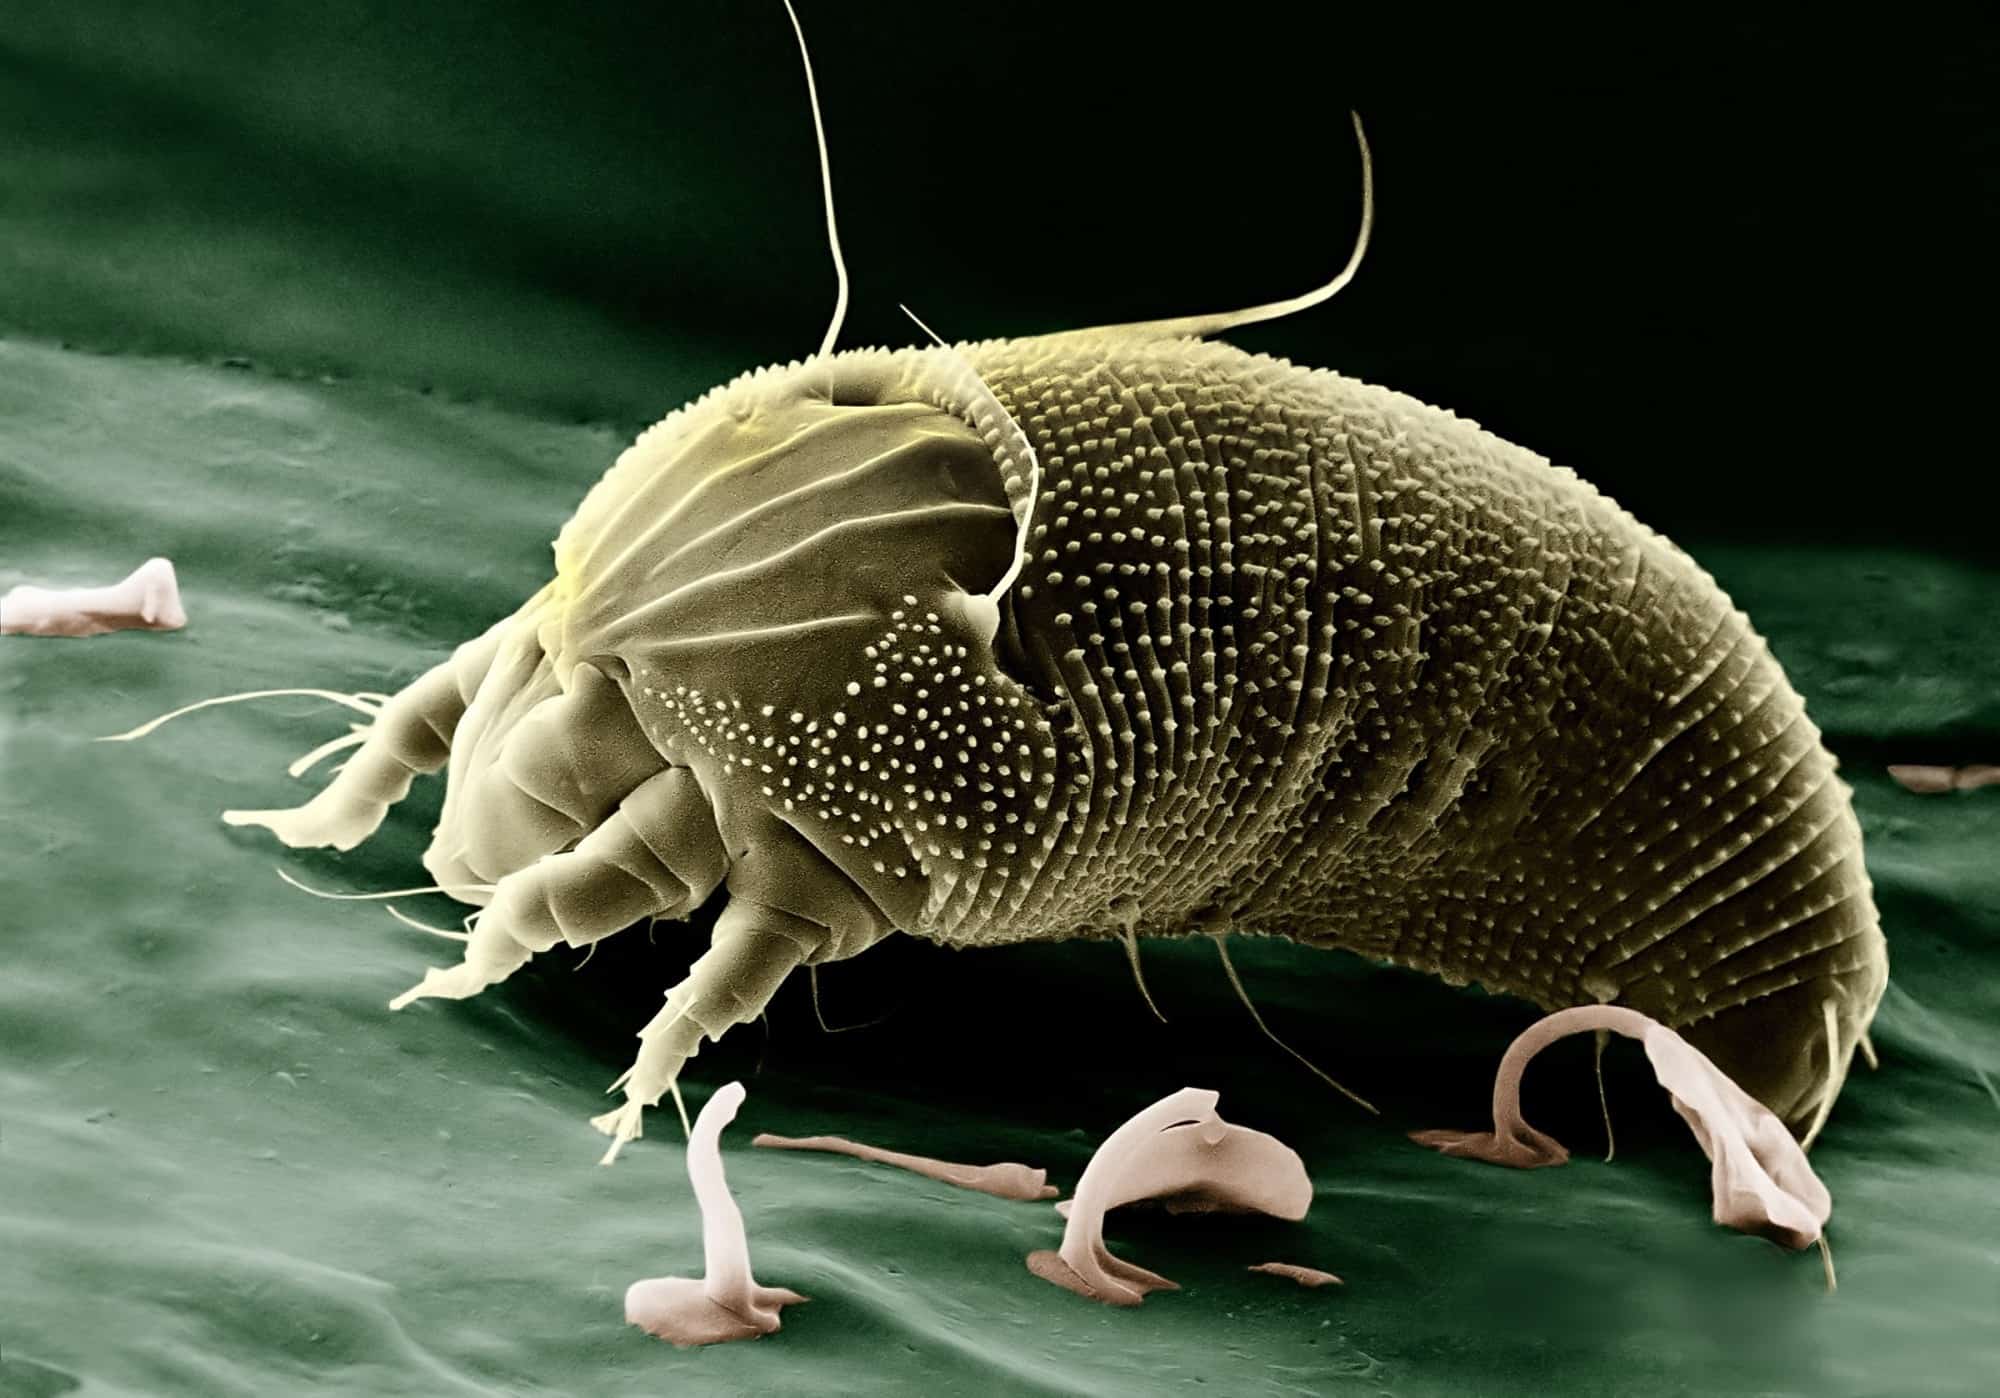 Microscopic view of a mite.